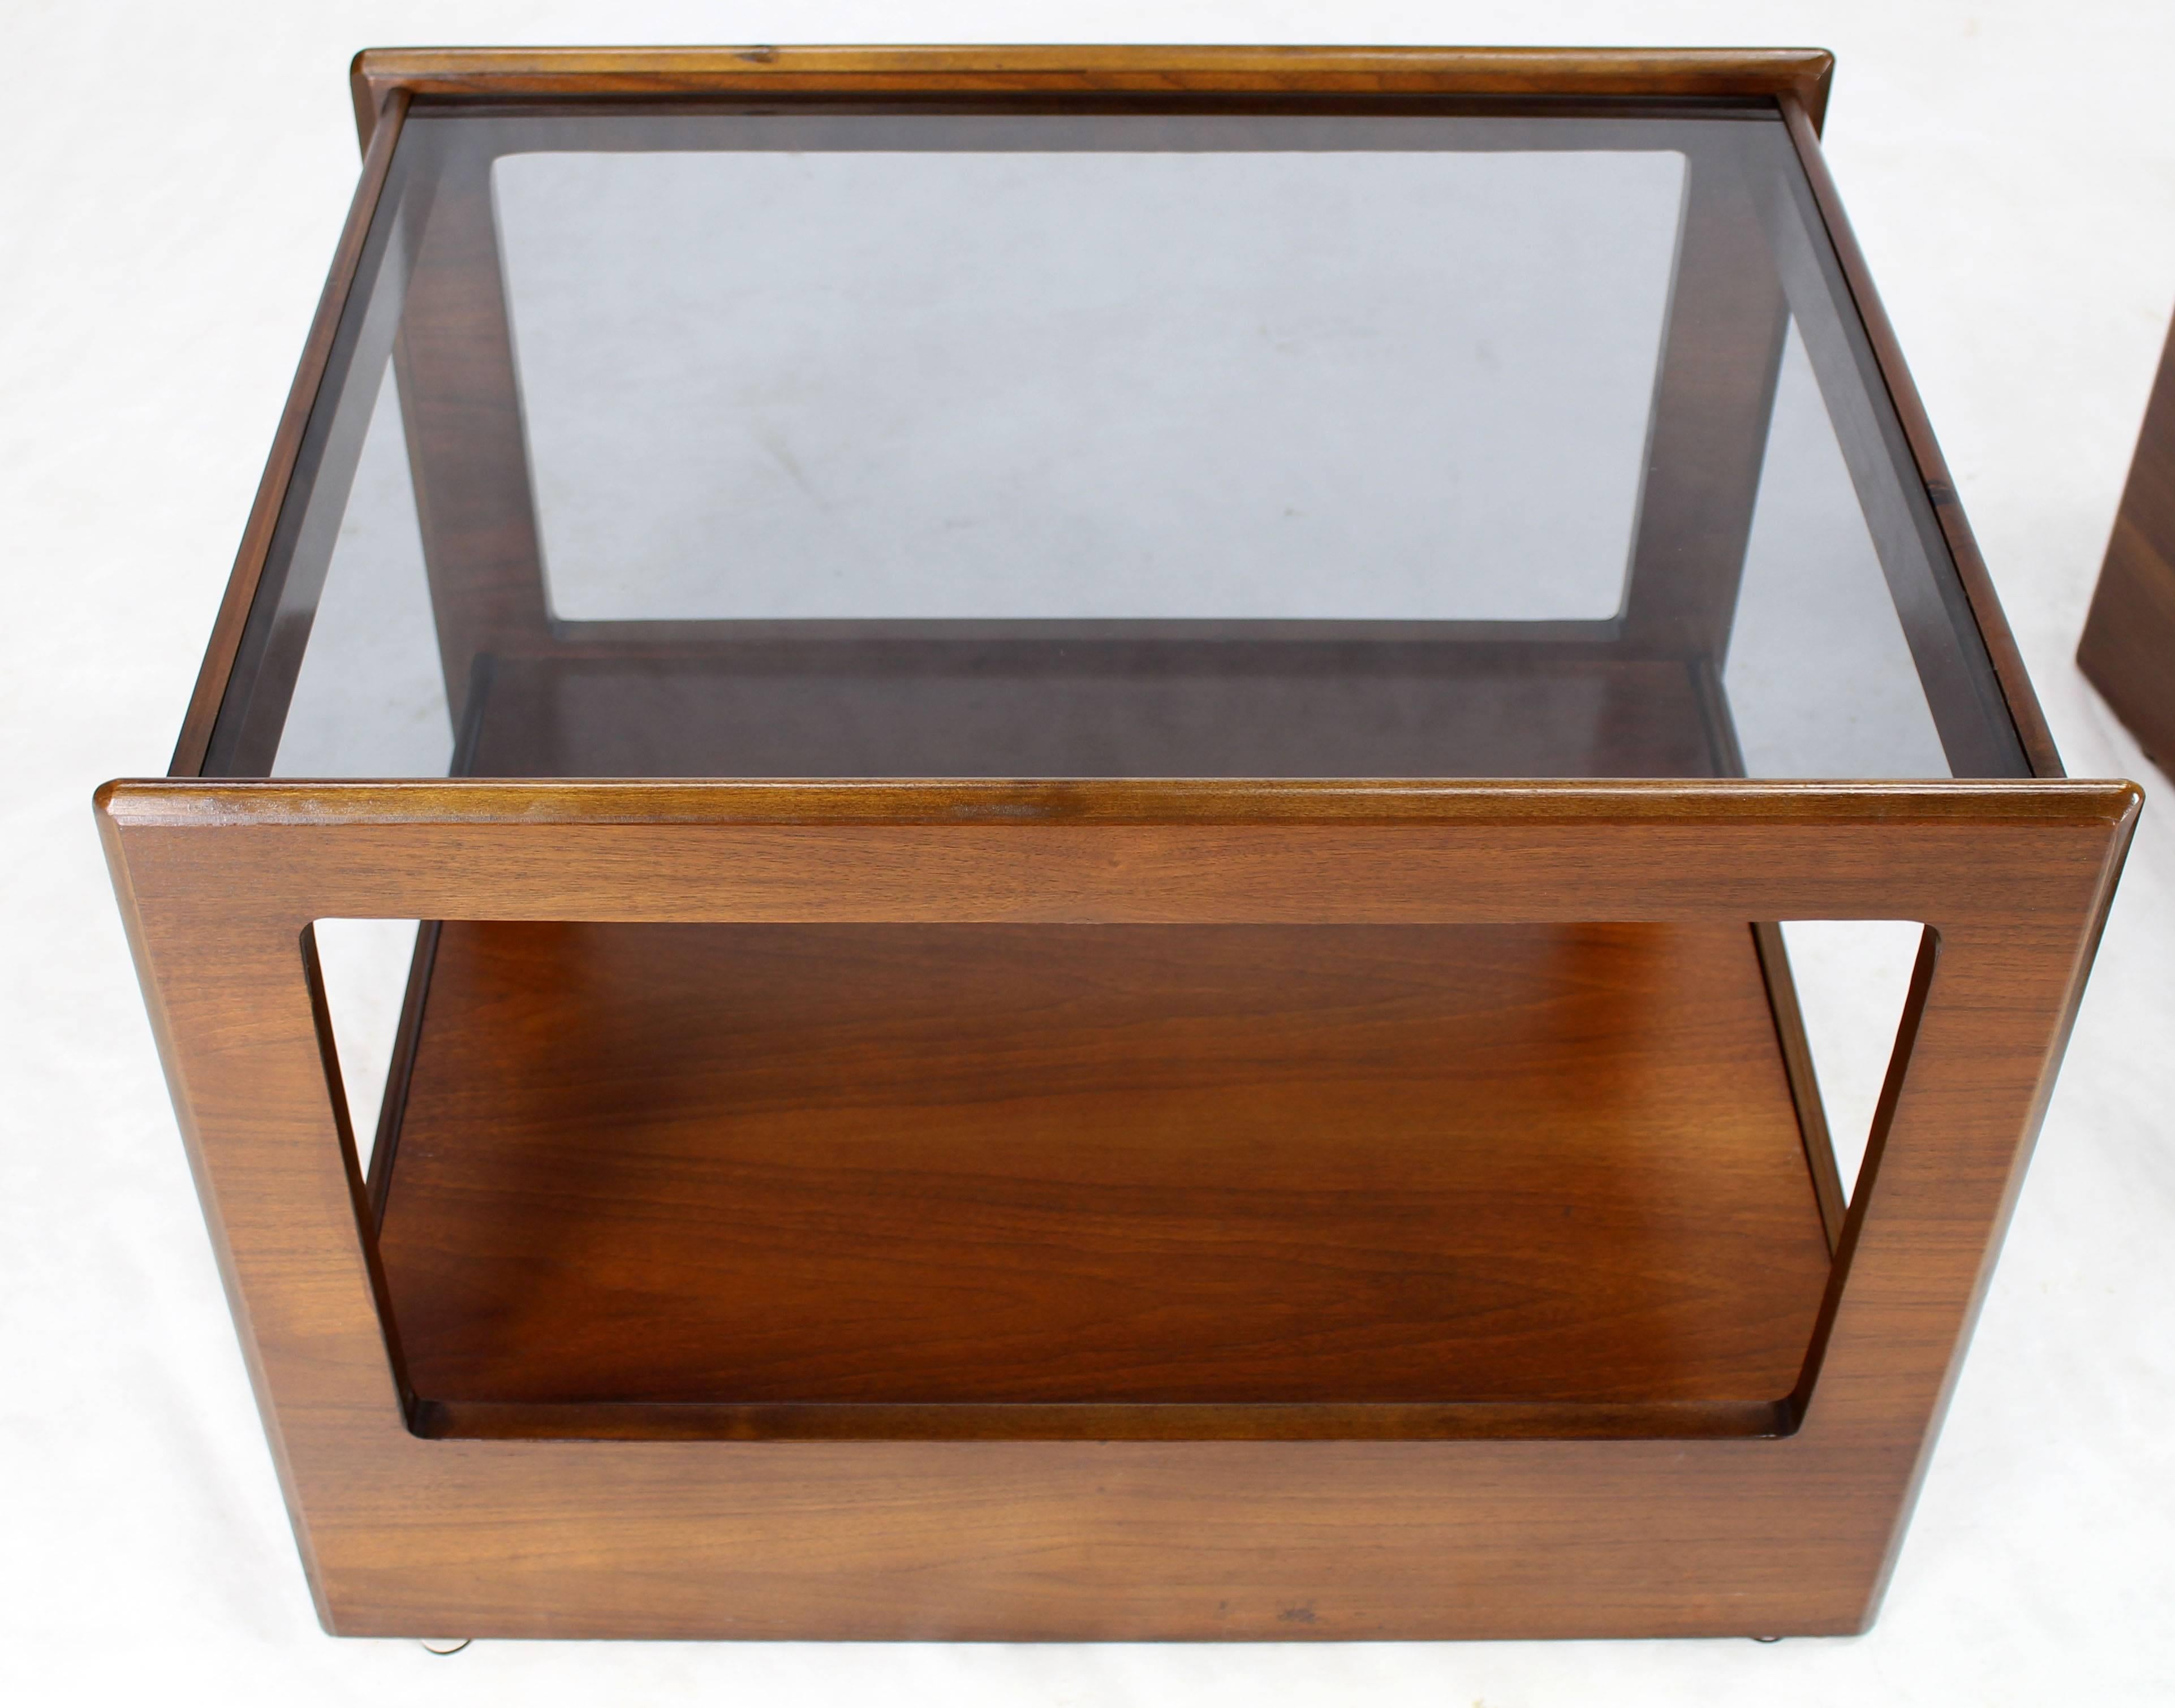 Pair of walnut Mid-Century Modern glass top cube shape two-tier end side tables stands with one drawer. Nice oiled walnut finish.